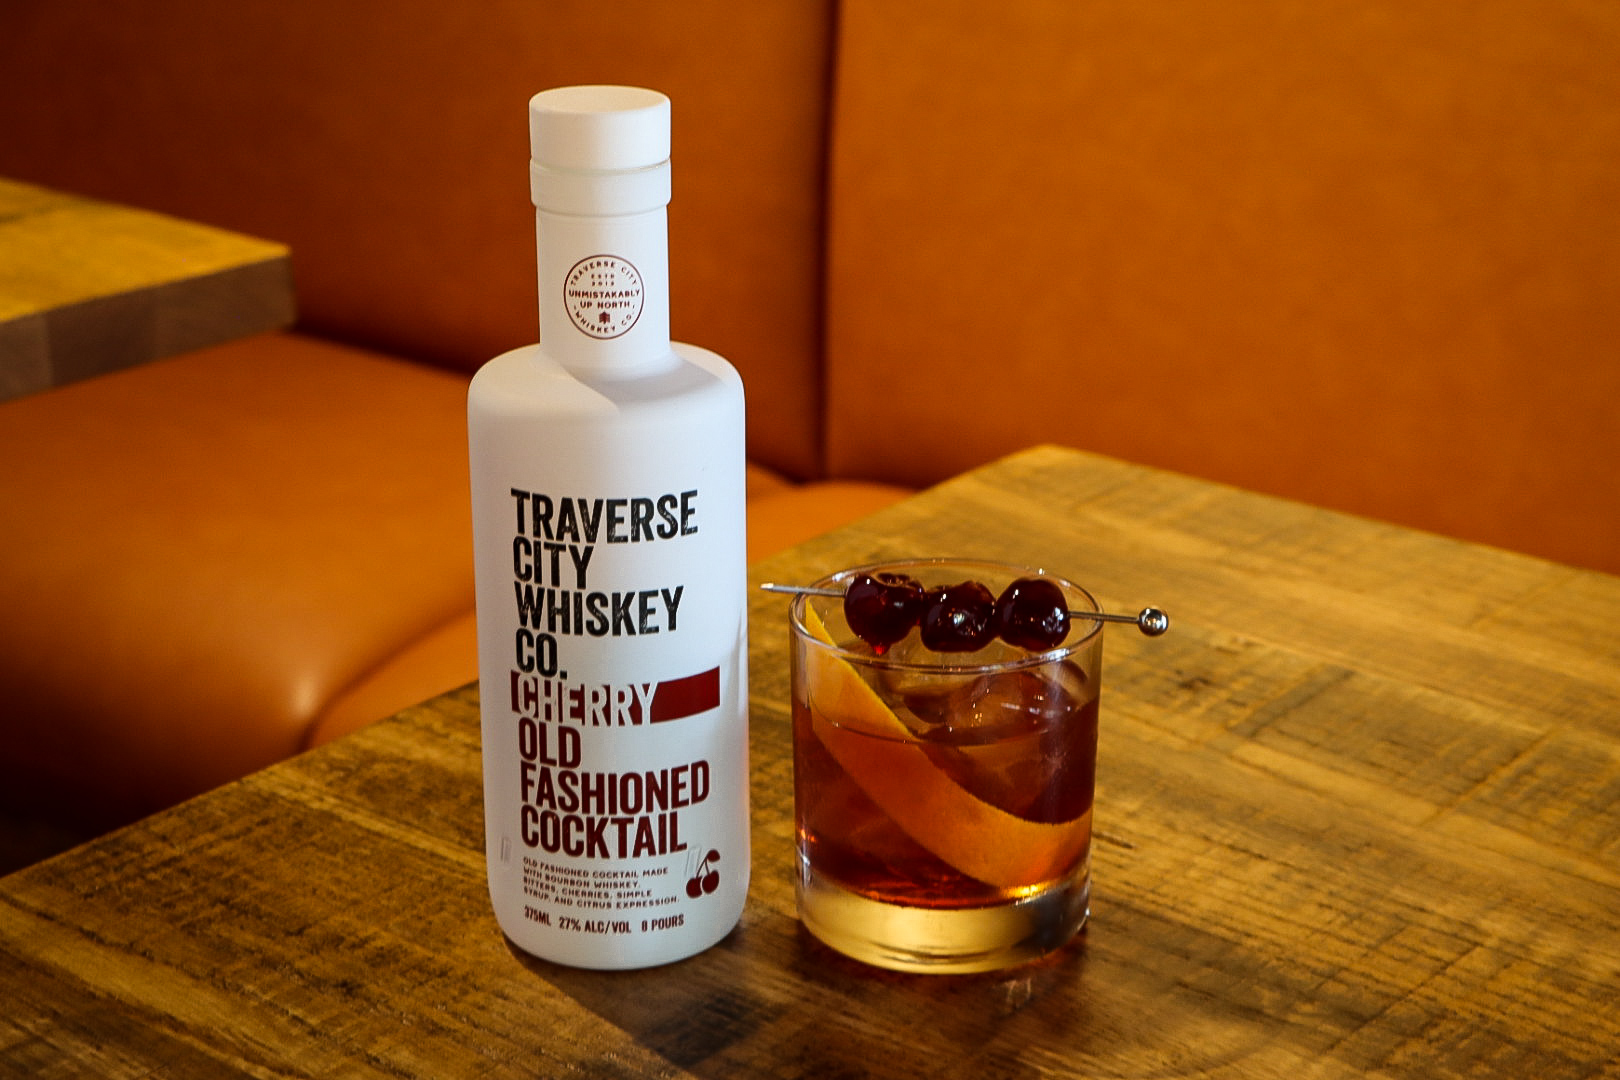 Traverse City Whiskey Co. Launches Two New Ready-to-Serve Old Fashioned Cocktails